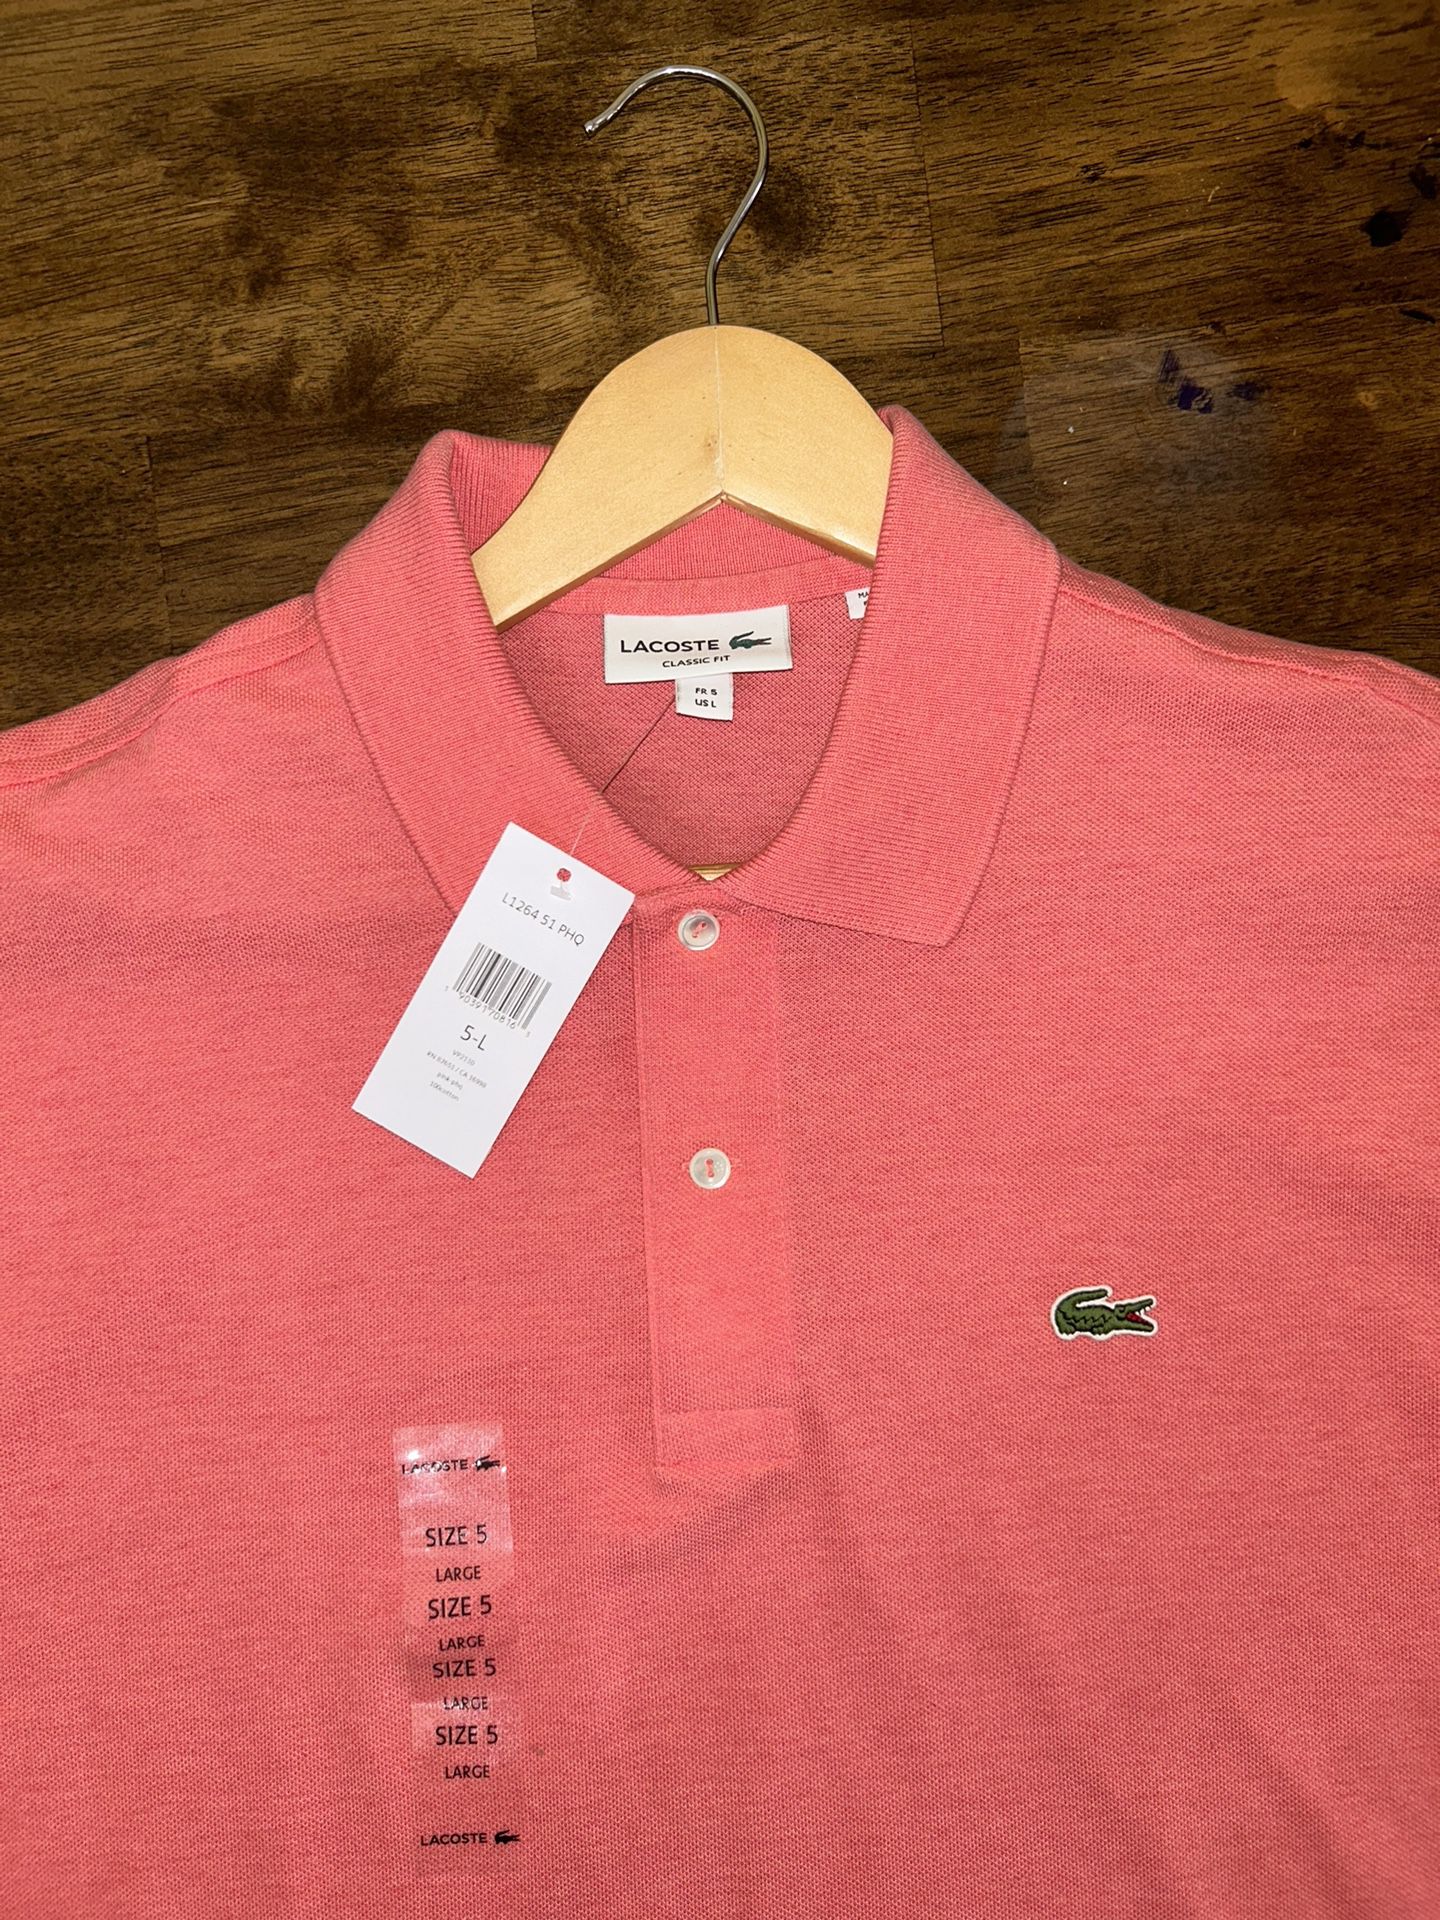 Lacoste Men's Classic Fit Polo for in San Mateo, CA - OfferUp